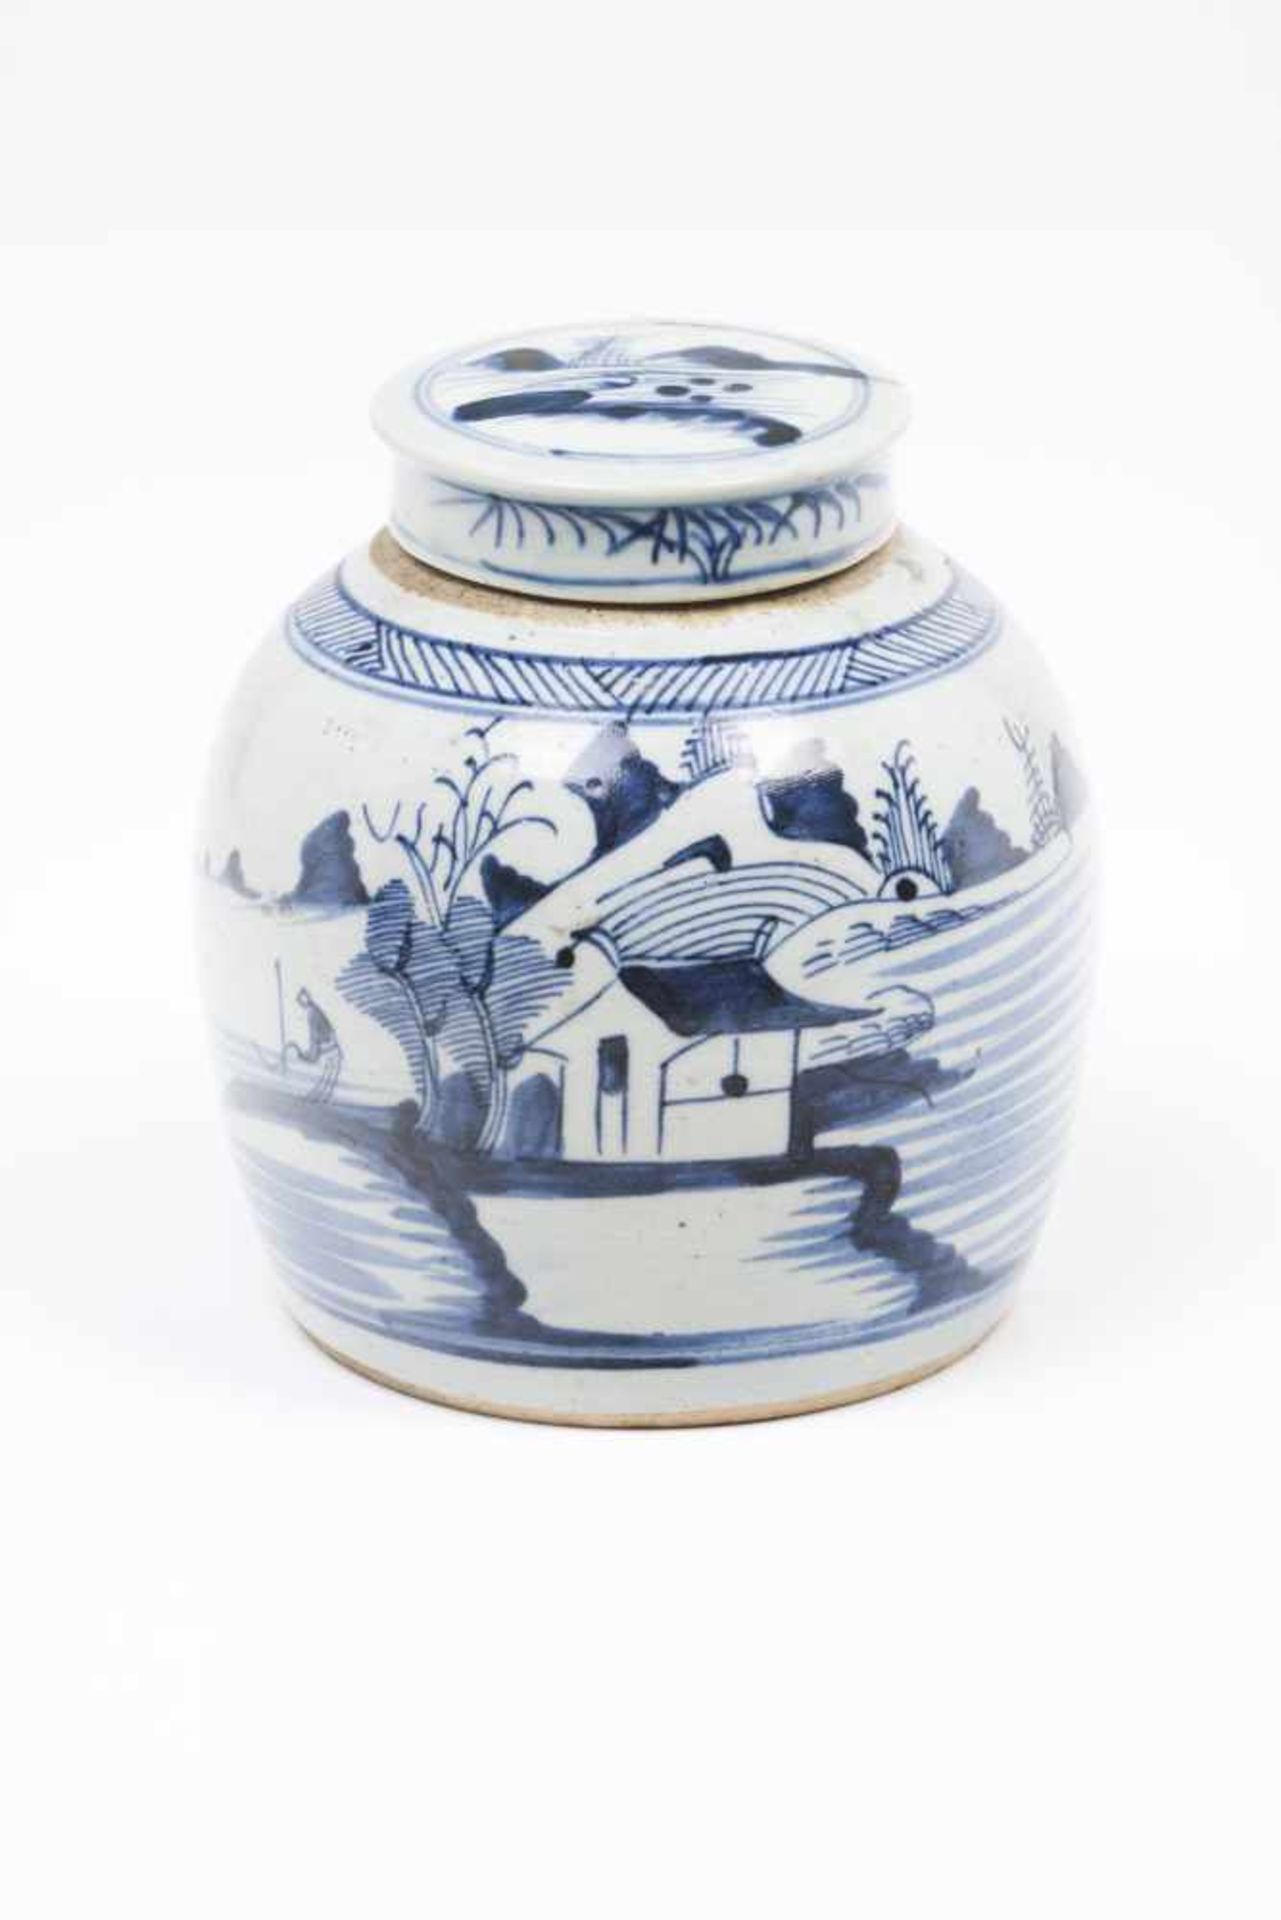 A ginger jarChinese porcelainBlue underglaze decoration with riverscapeMing dynasty, 17th century(